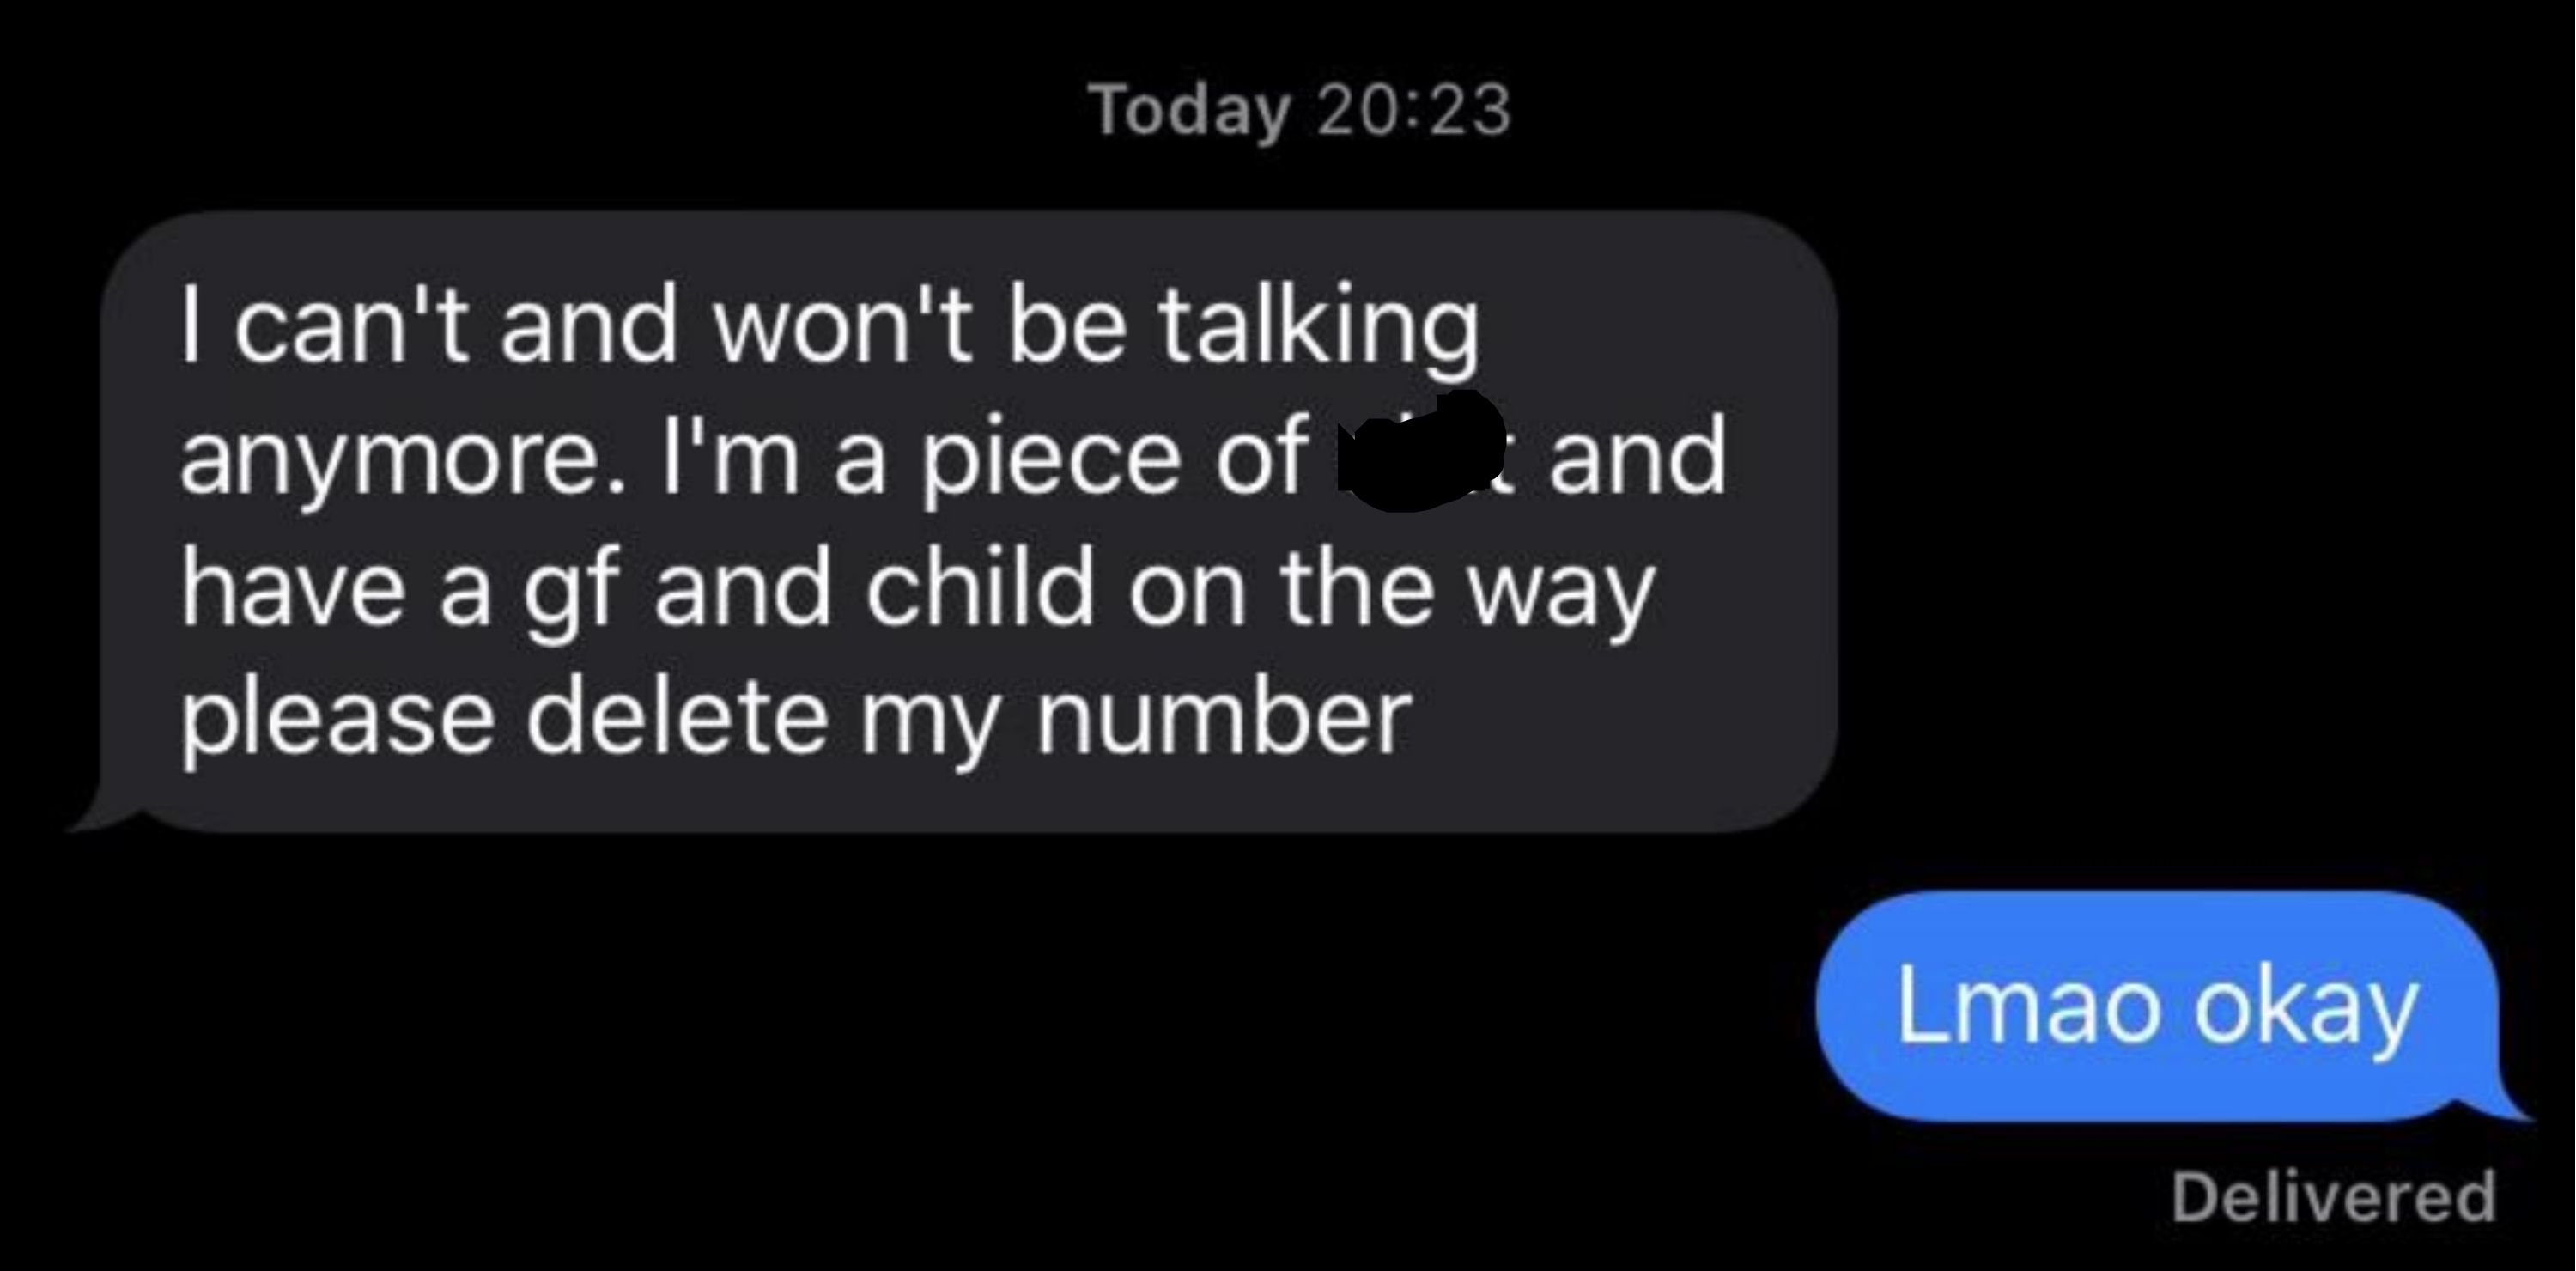 &quot;I can&#x27;t and won&#x27;t be talking anymore; I&#x27;m a piece of shit and have a gf and child on the way please delete my number&quot;; &quot;Lmao okay&quot;